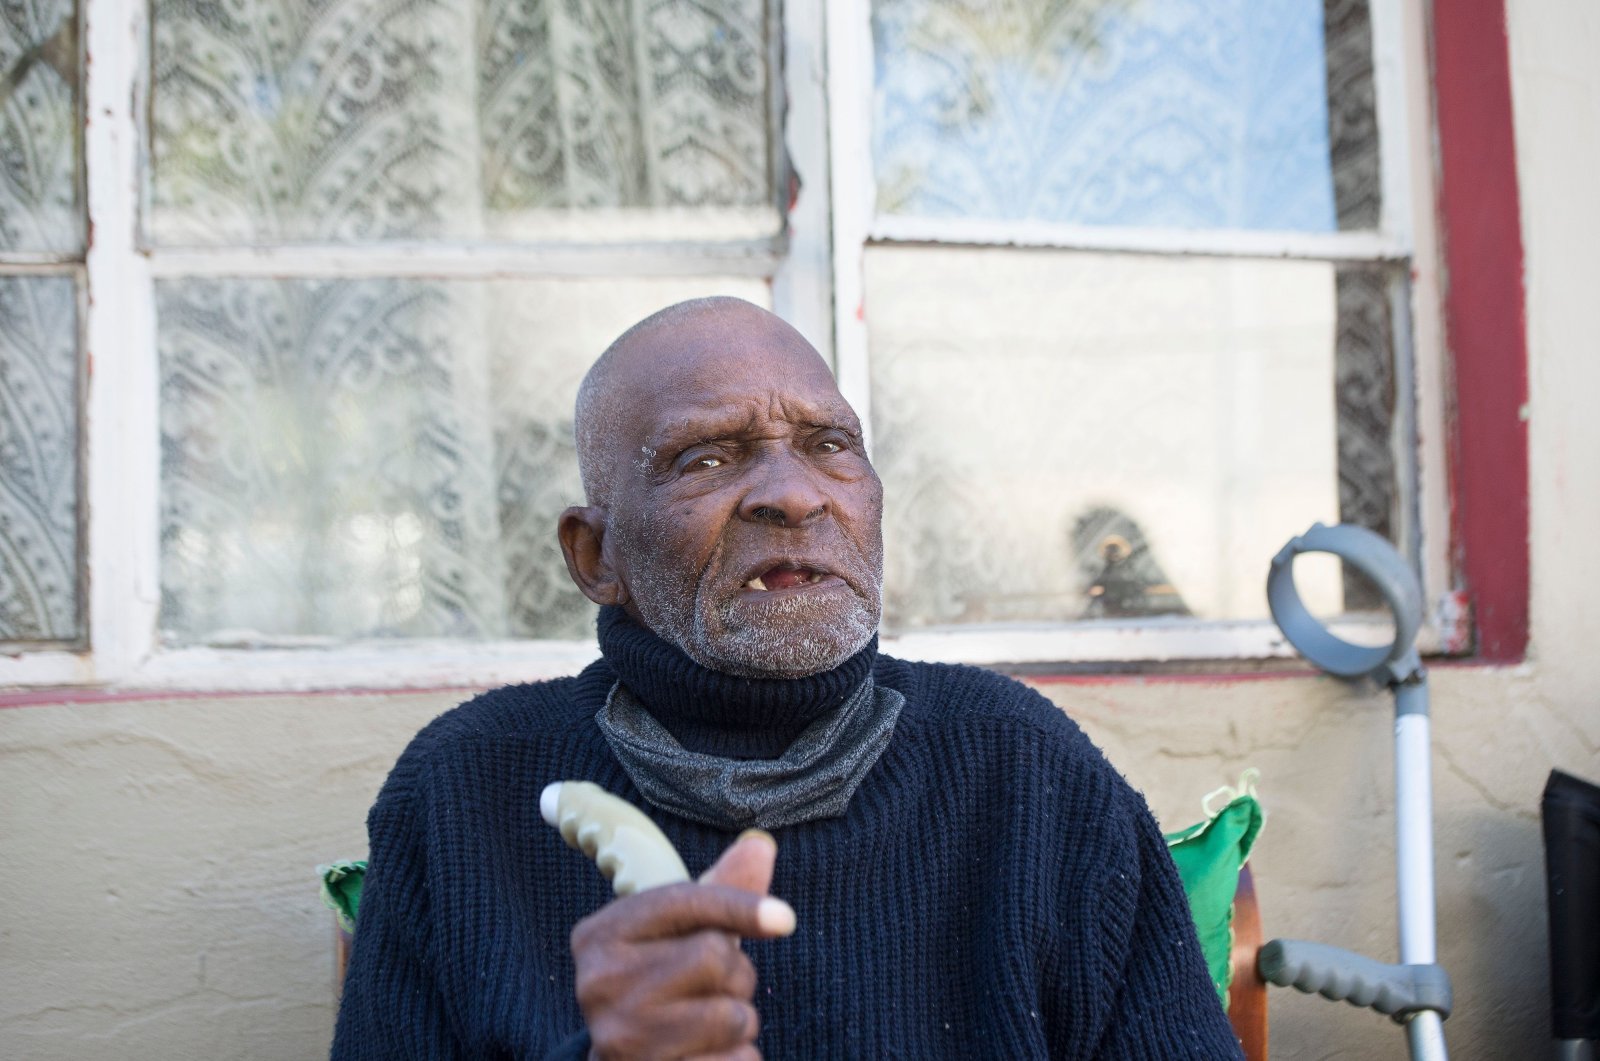 Fredie Blom talks about his recollections as he celebrates his 116th birthday at his home in Delft, near Cape Town on May 8, 2020. (AFP Photo)